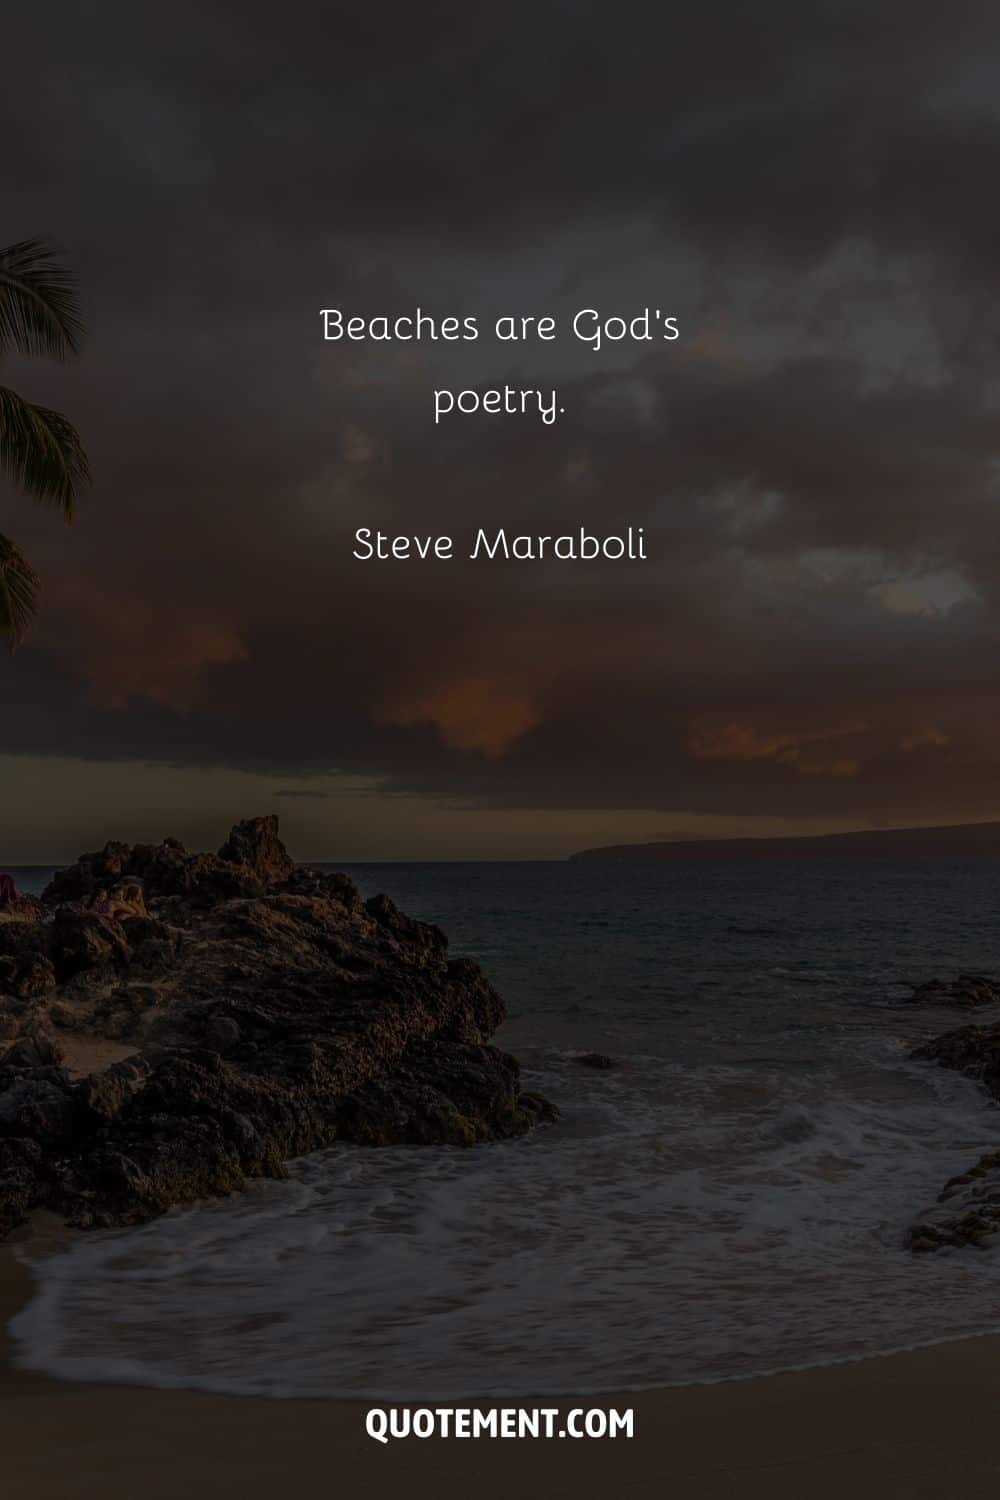 Inspirational quote about beaches and a wave at the beach.